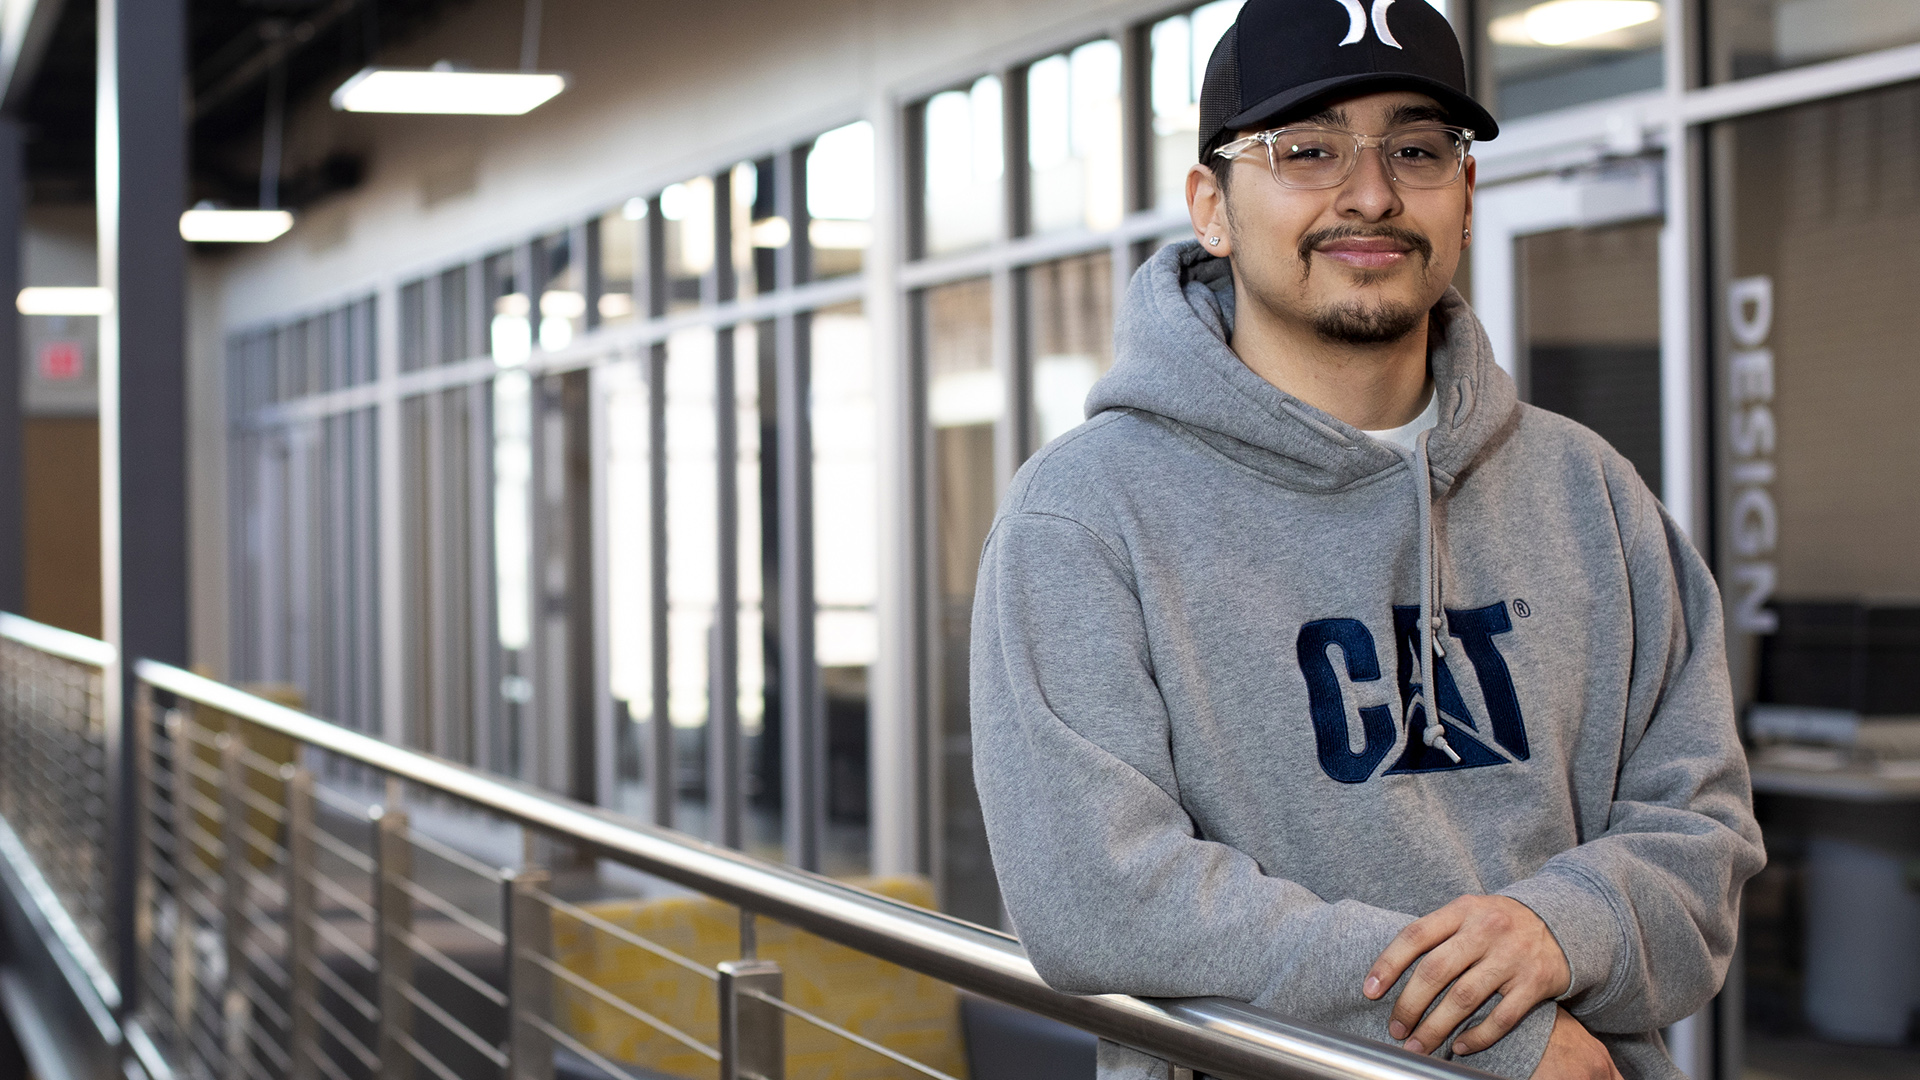 Emmanuel Vargas stands next to a railing for an indoor walkway balcony, with glass walls and doors in the background.